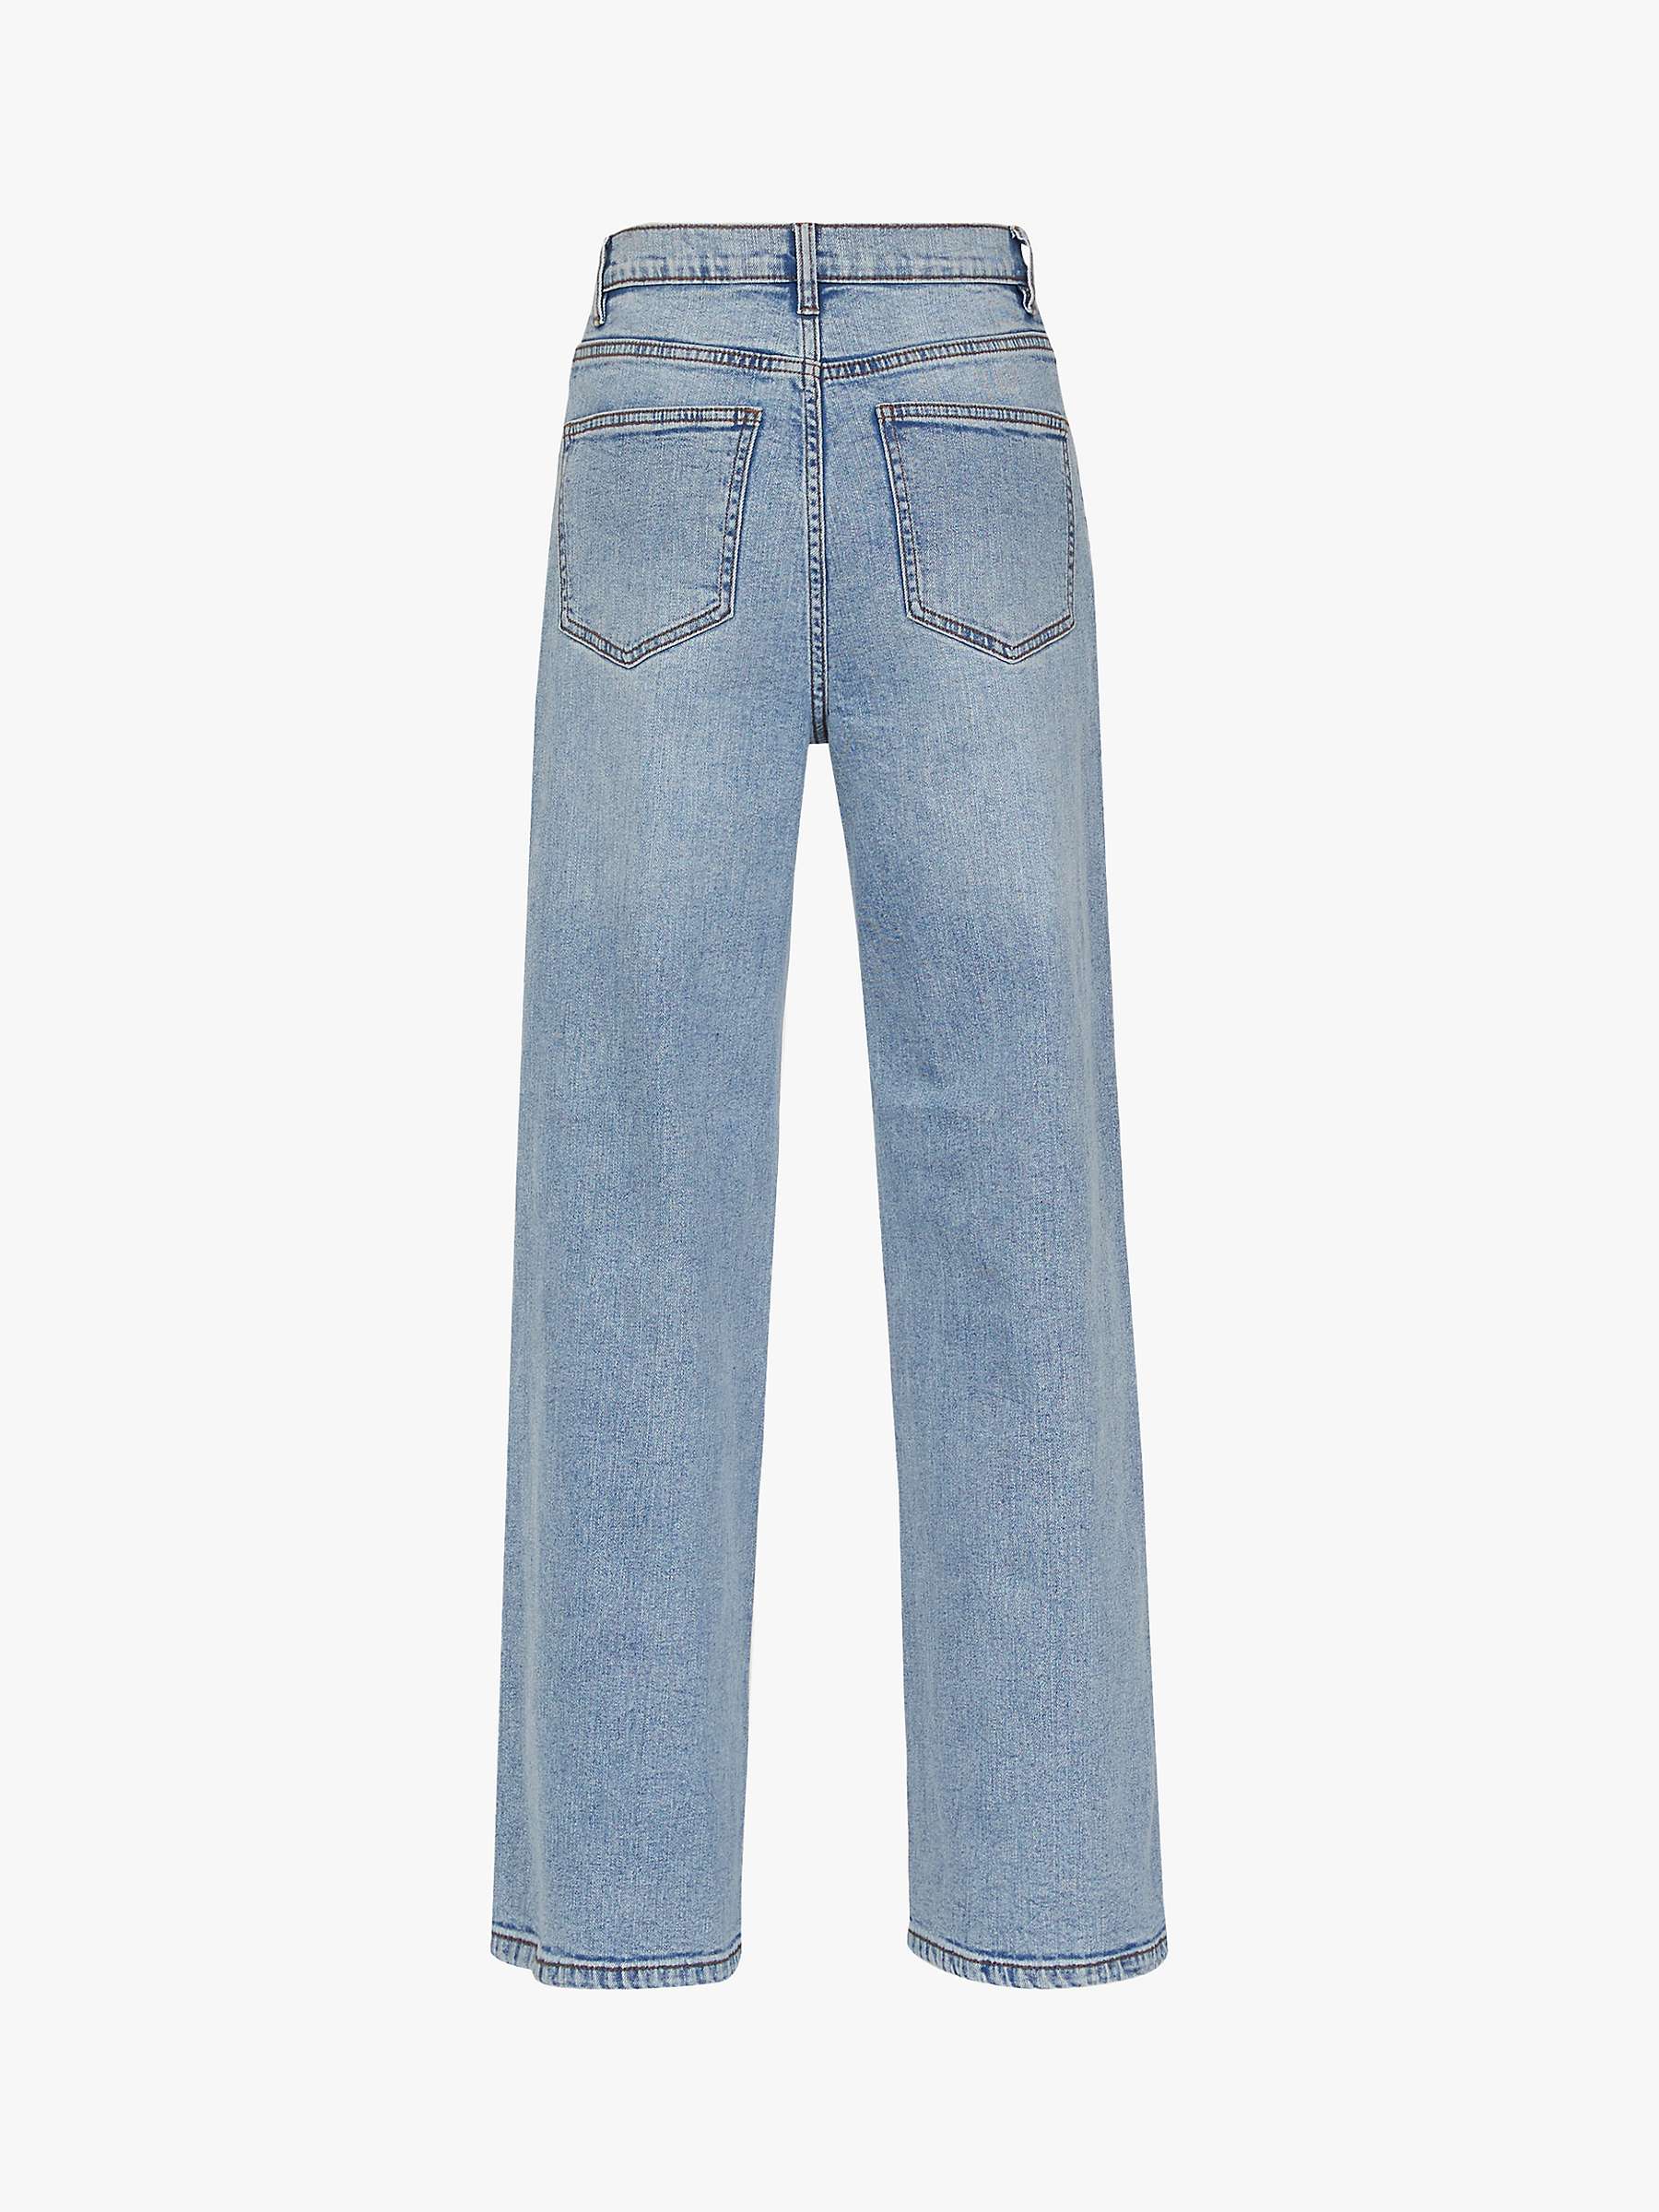 Buy Sisters Point Owi Cotton Blend Wide Leg Jeans, Blue Used Online at johnlewis.com